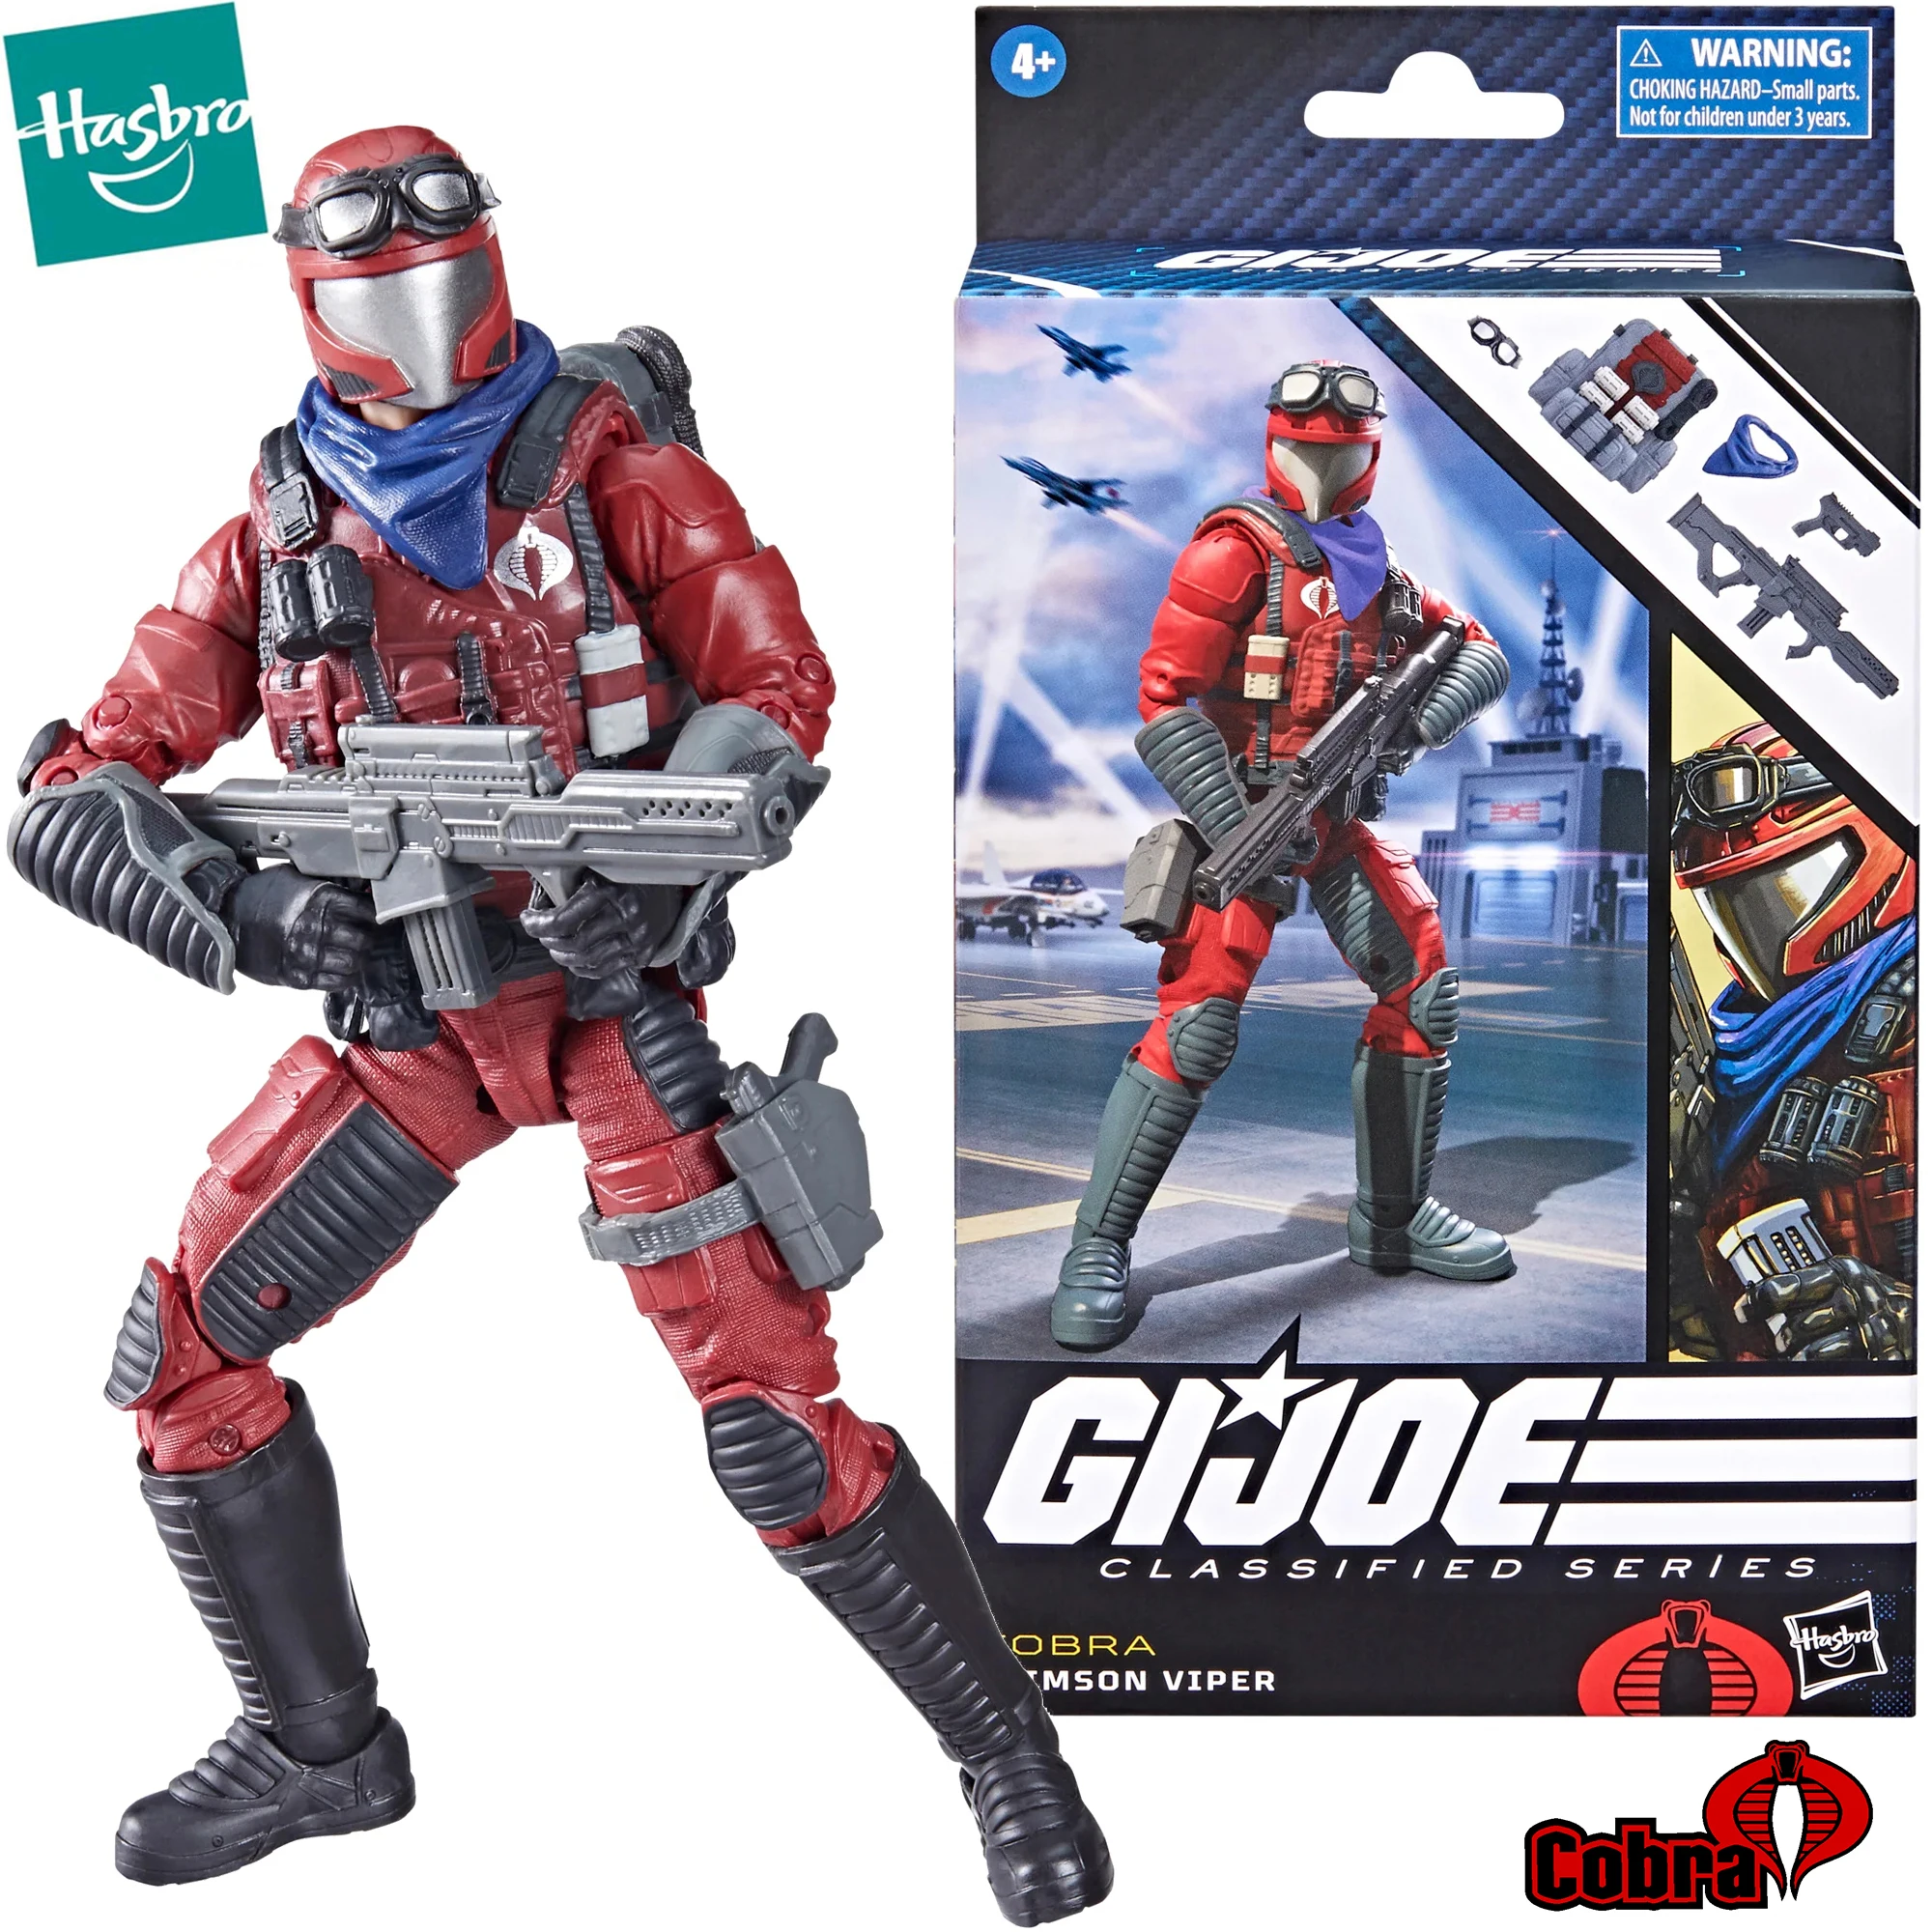 

In Stock Hasbro G.i. Joe Classified Series Crimson Viper, 85 Action Figure Collectible Model Toys Gifts for Fans